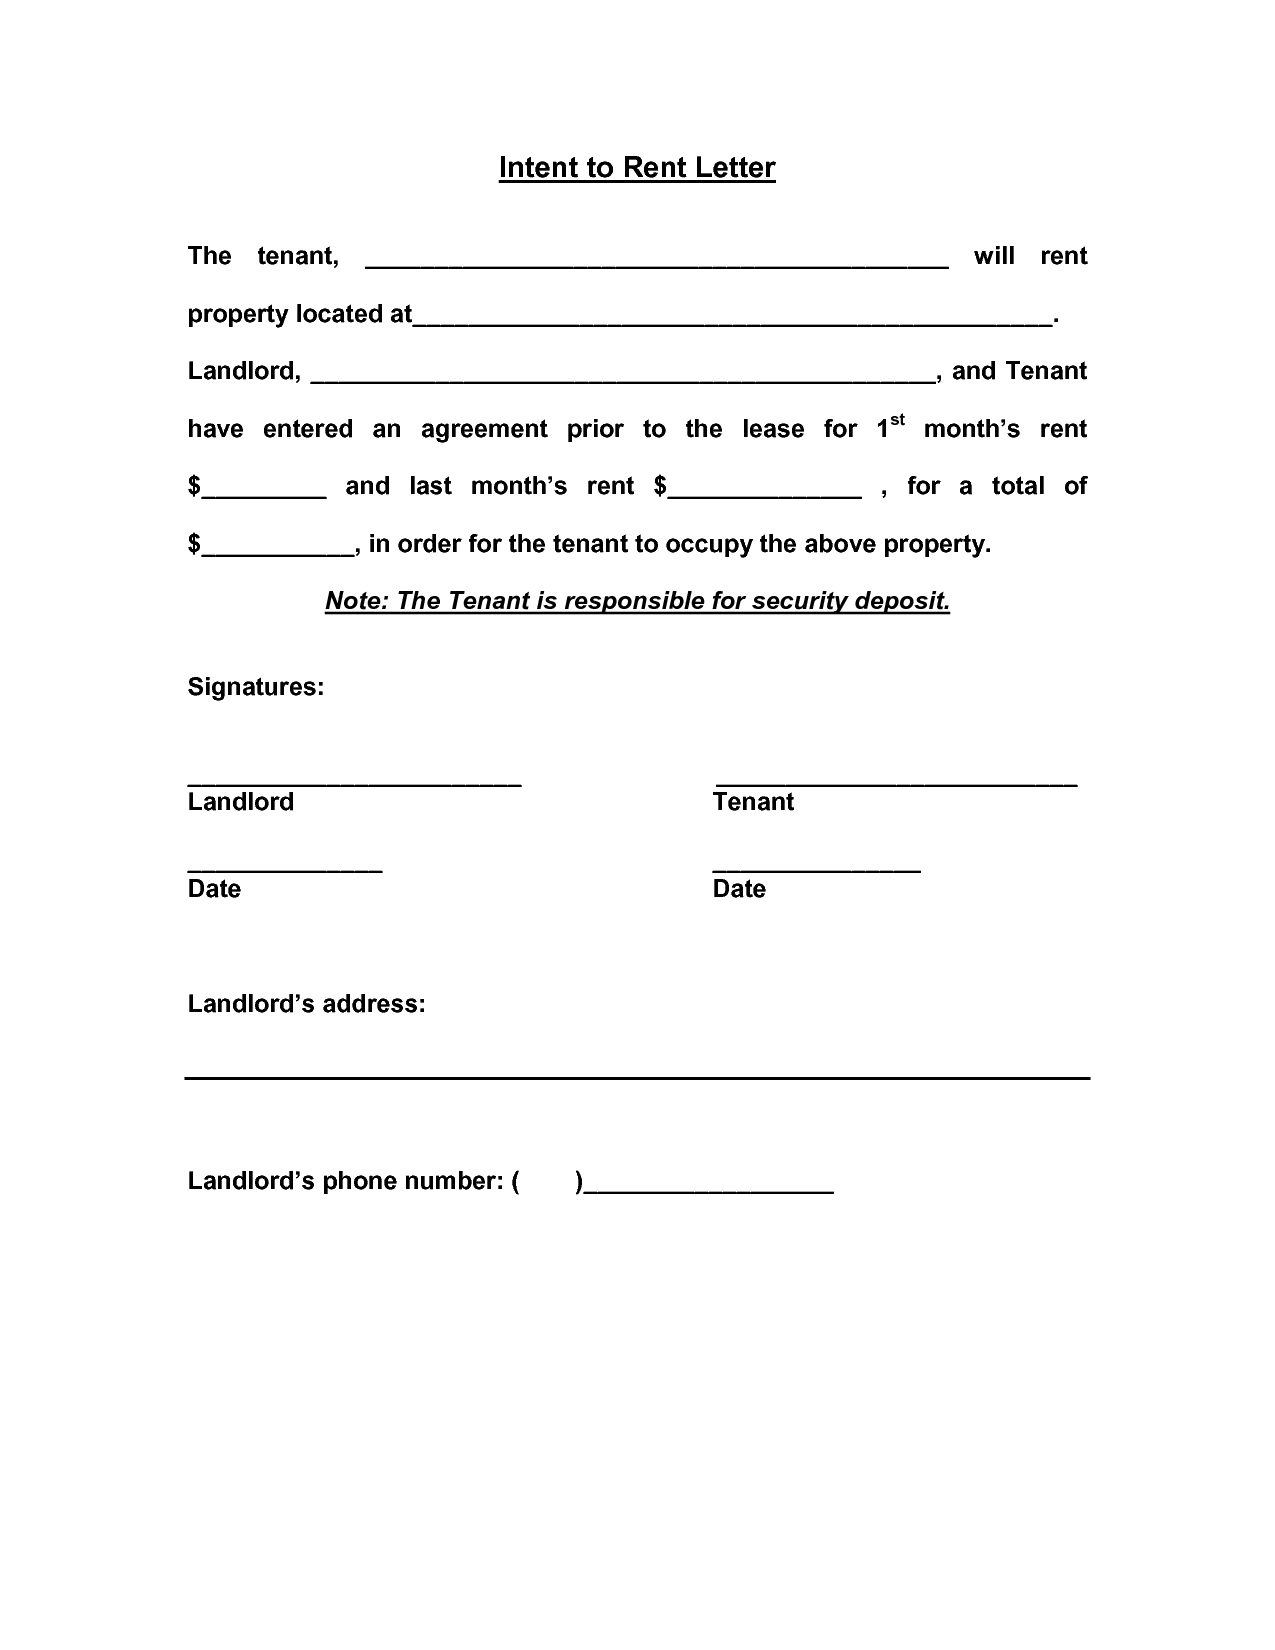 letter-of-intent-to-lease-commercial-property-template-resume-letter